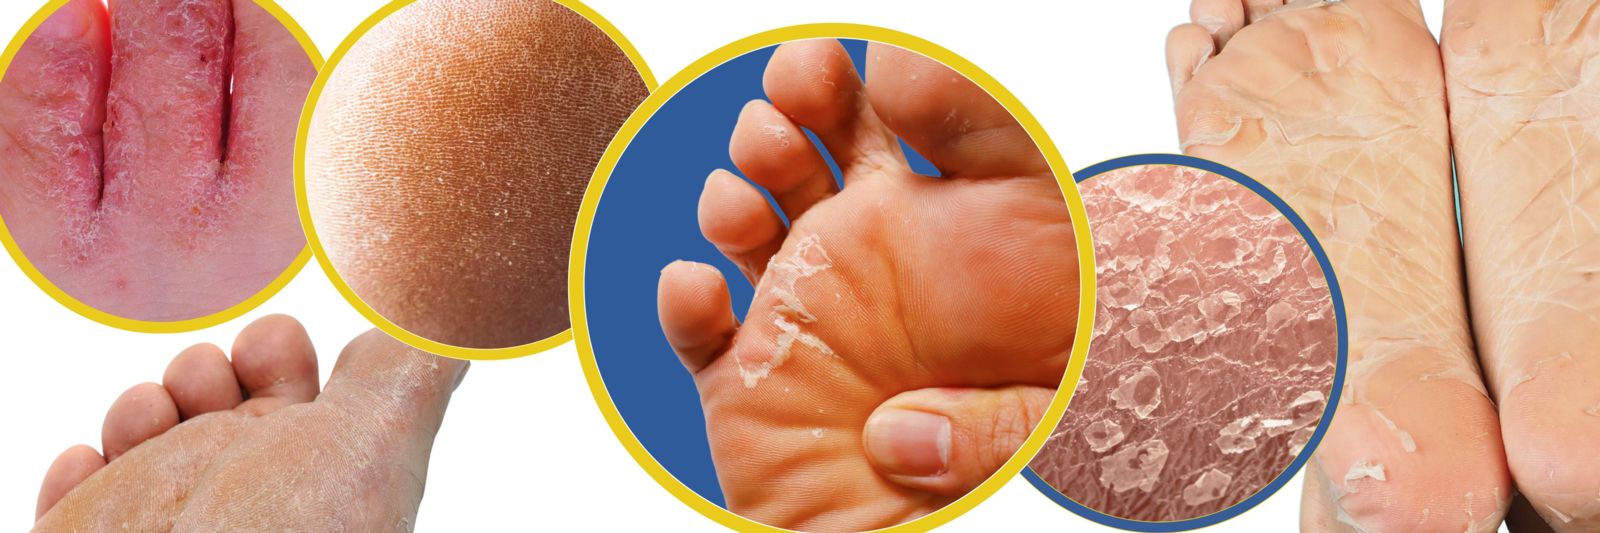 Athlete's foot: Home remedies, treatment, and causes